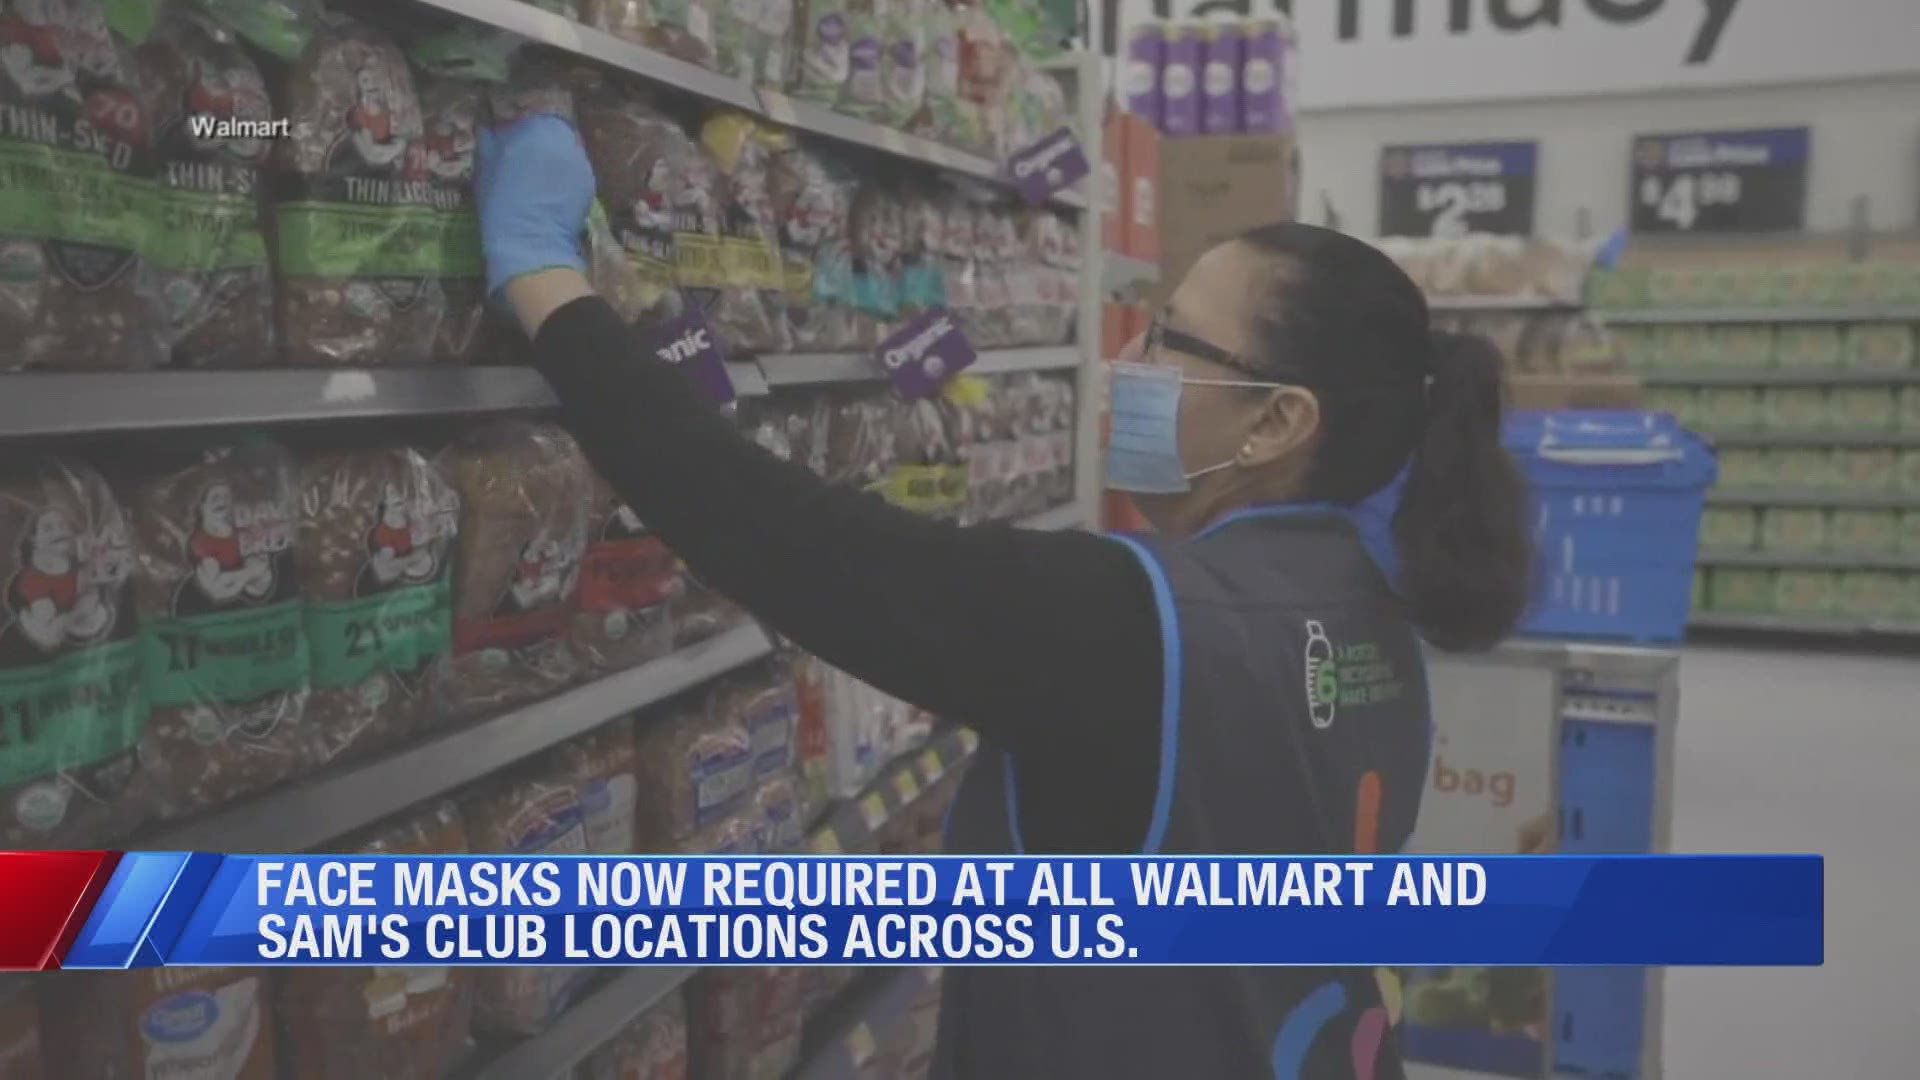 Walmart and Sam's Club said that requiring masks 'is a simple step everyone can take for their safety and the safety of others in our facilities.'